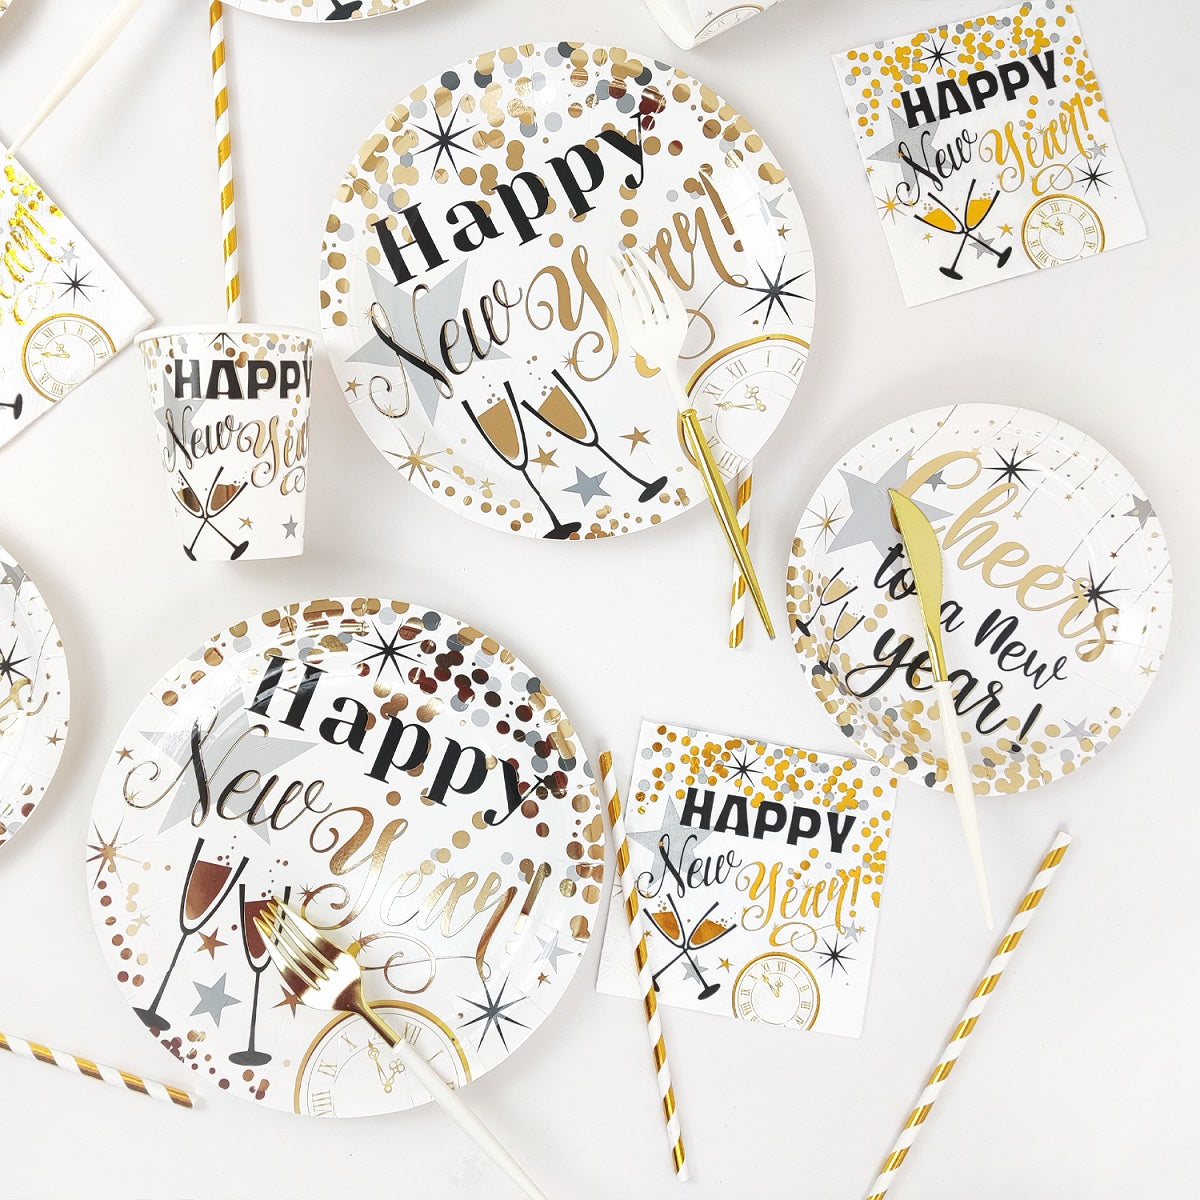 White Happy New Year Wholesale Disposable Paper Party Tableware Set Plates Cups Napkins